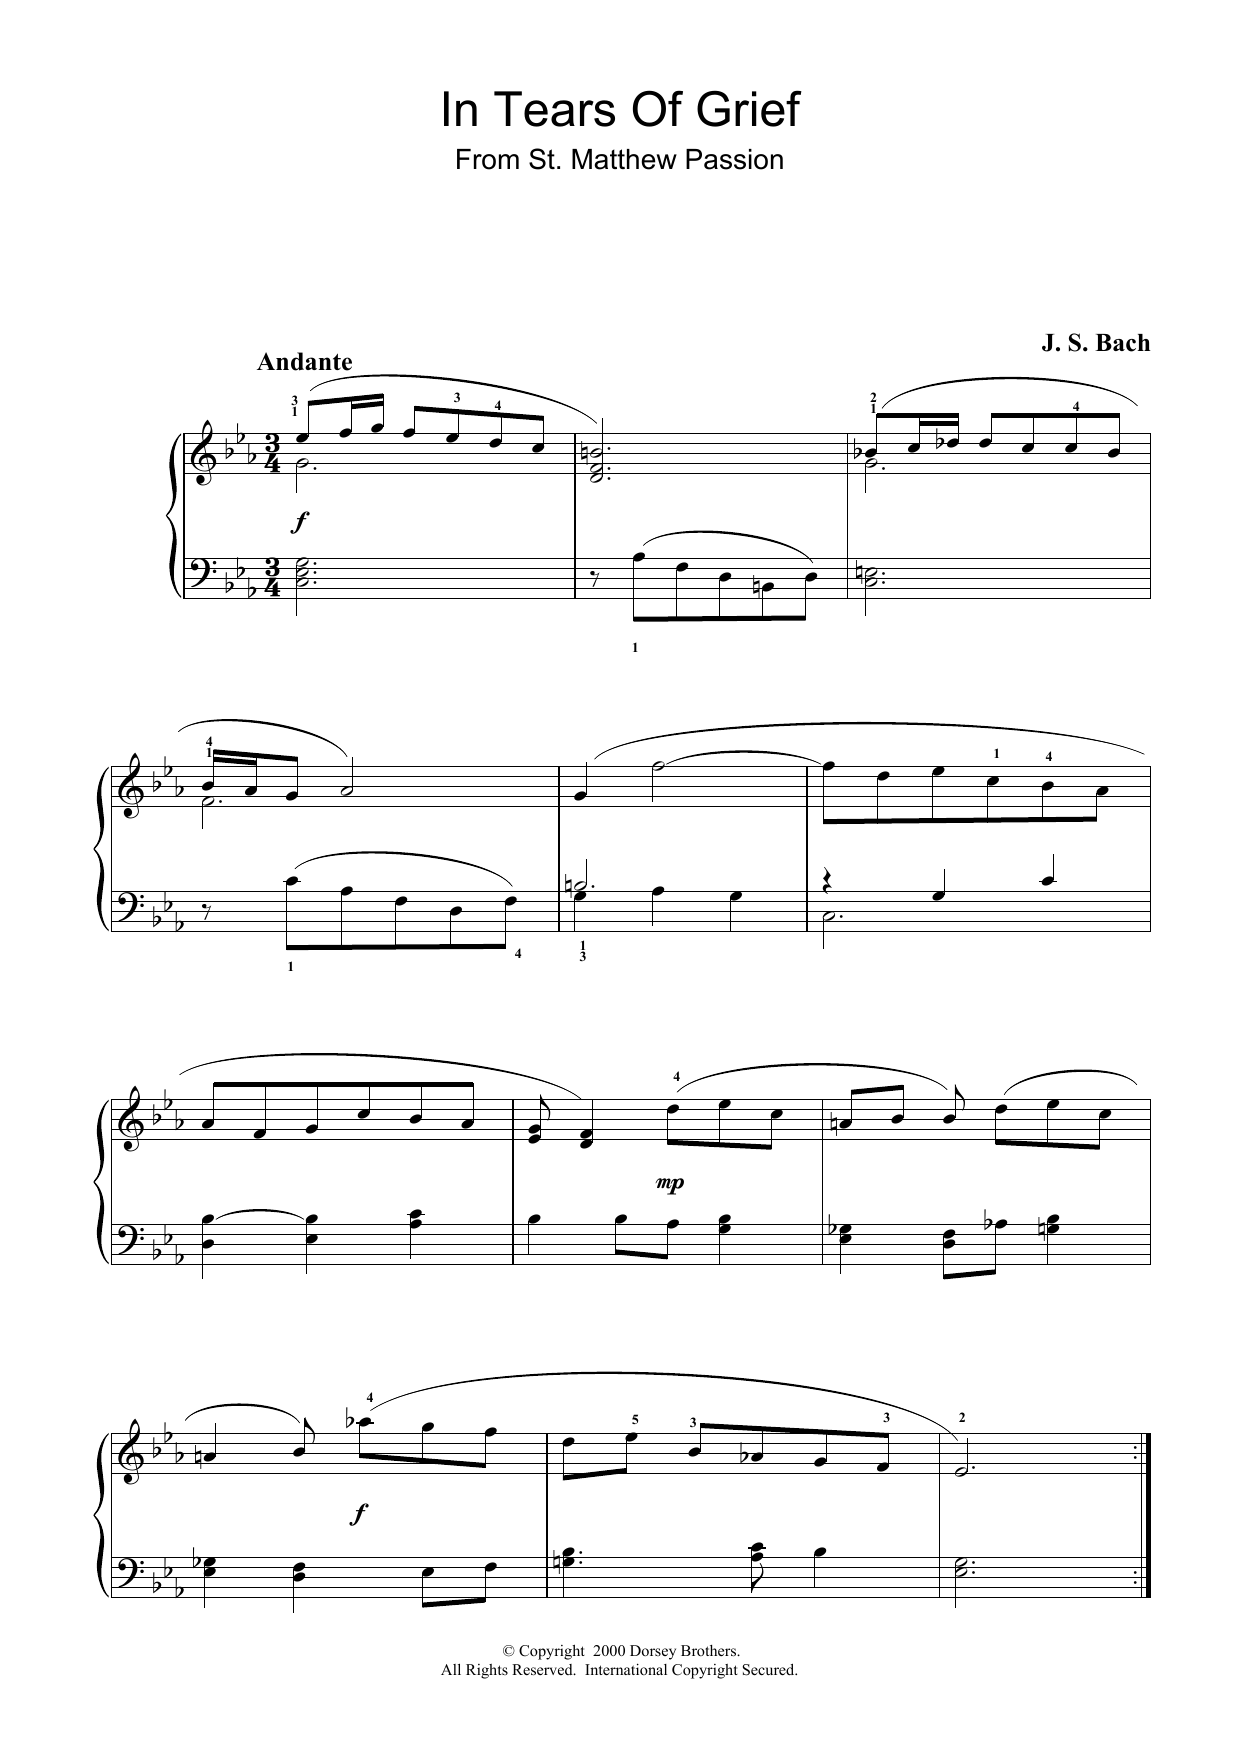 Johann Sebastian Bach In Tears Of Grief (from St Matthew Passion) sheet music notes and chords. Download Printable PDF.